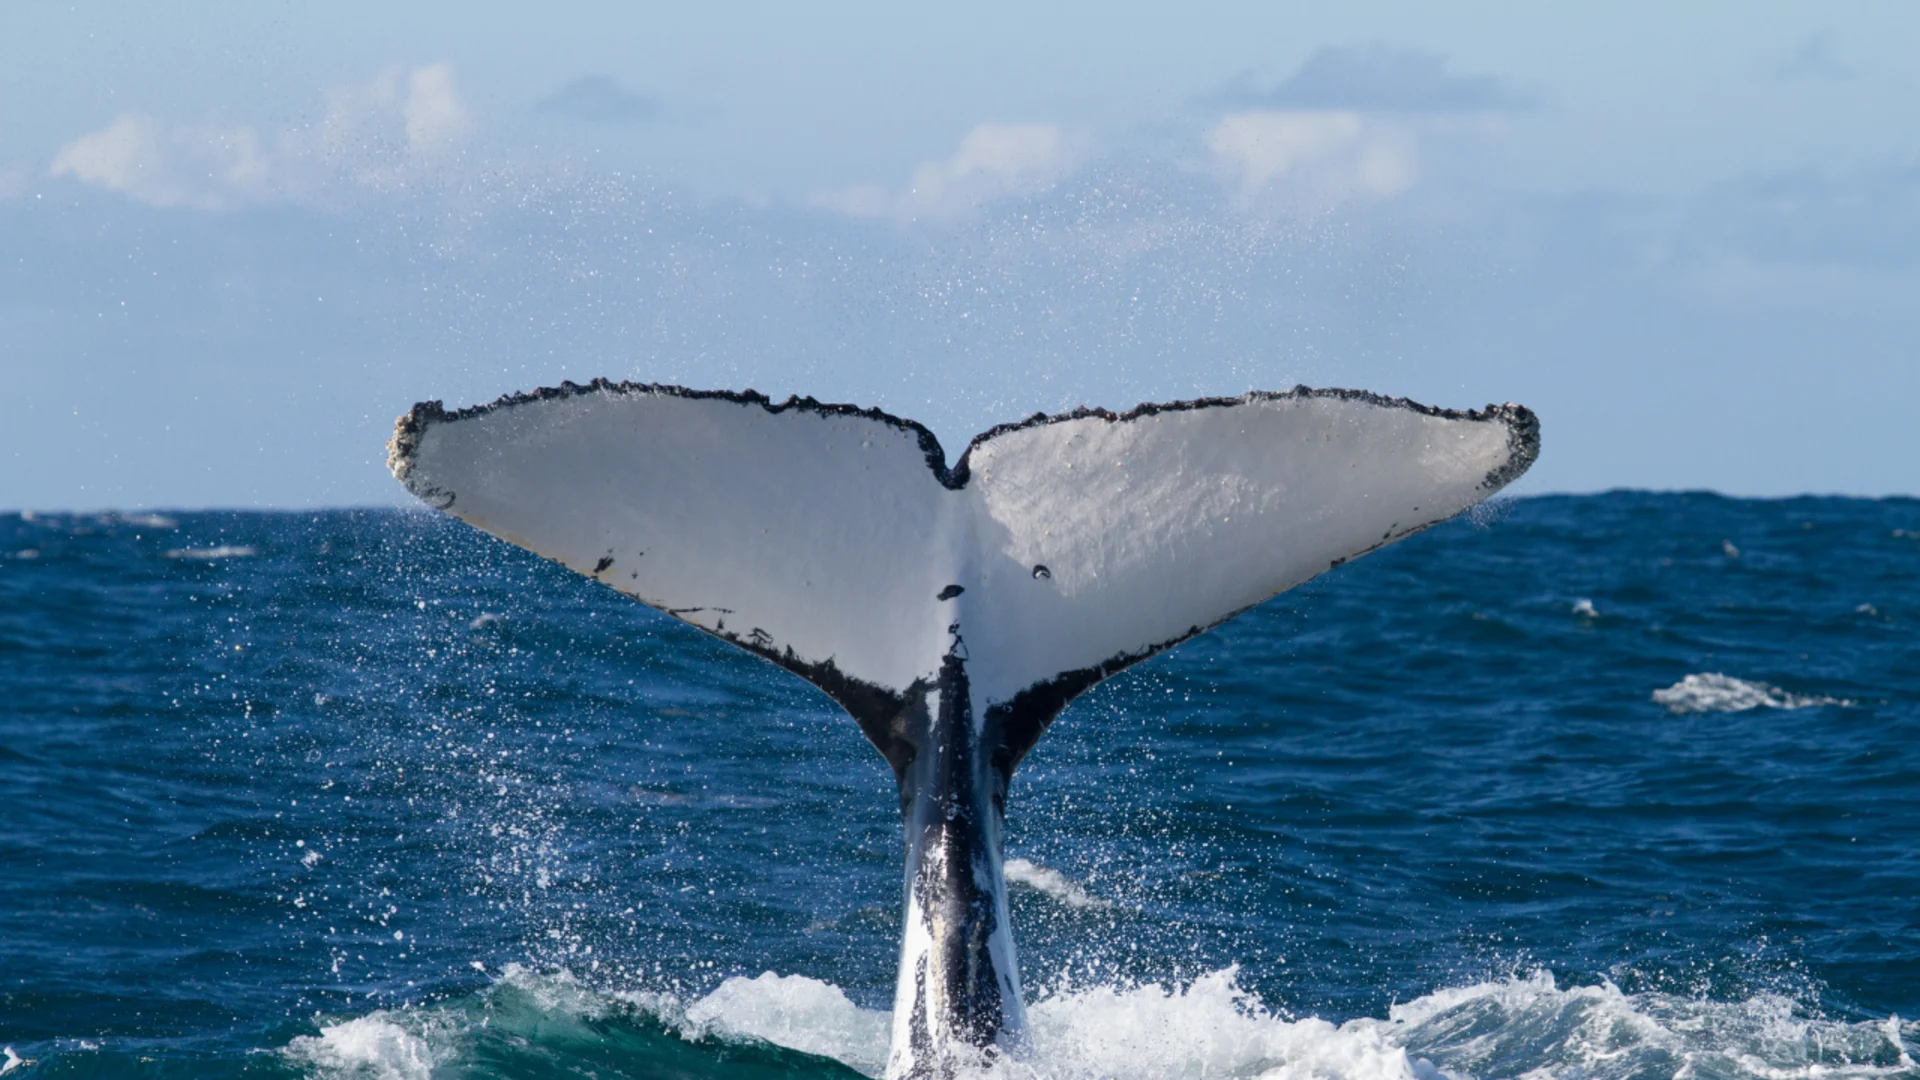 Migrating whales return to B.C. waters. Here's how you can see them safely